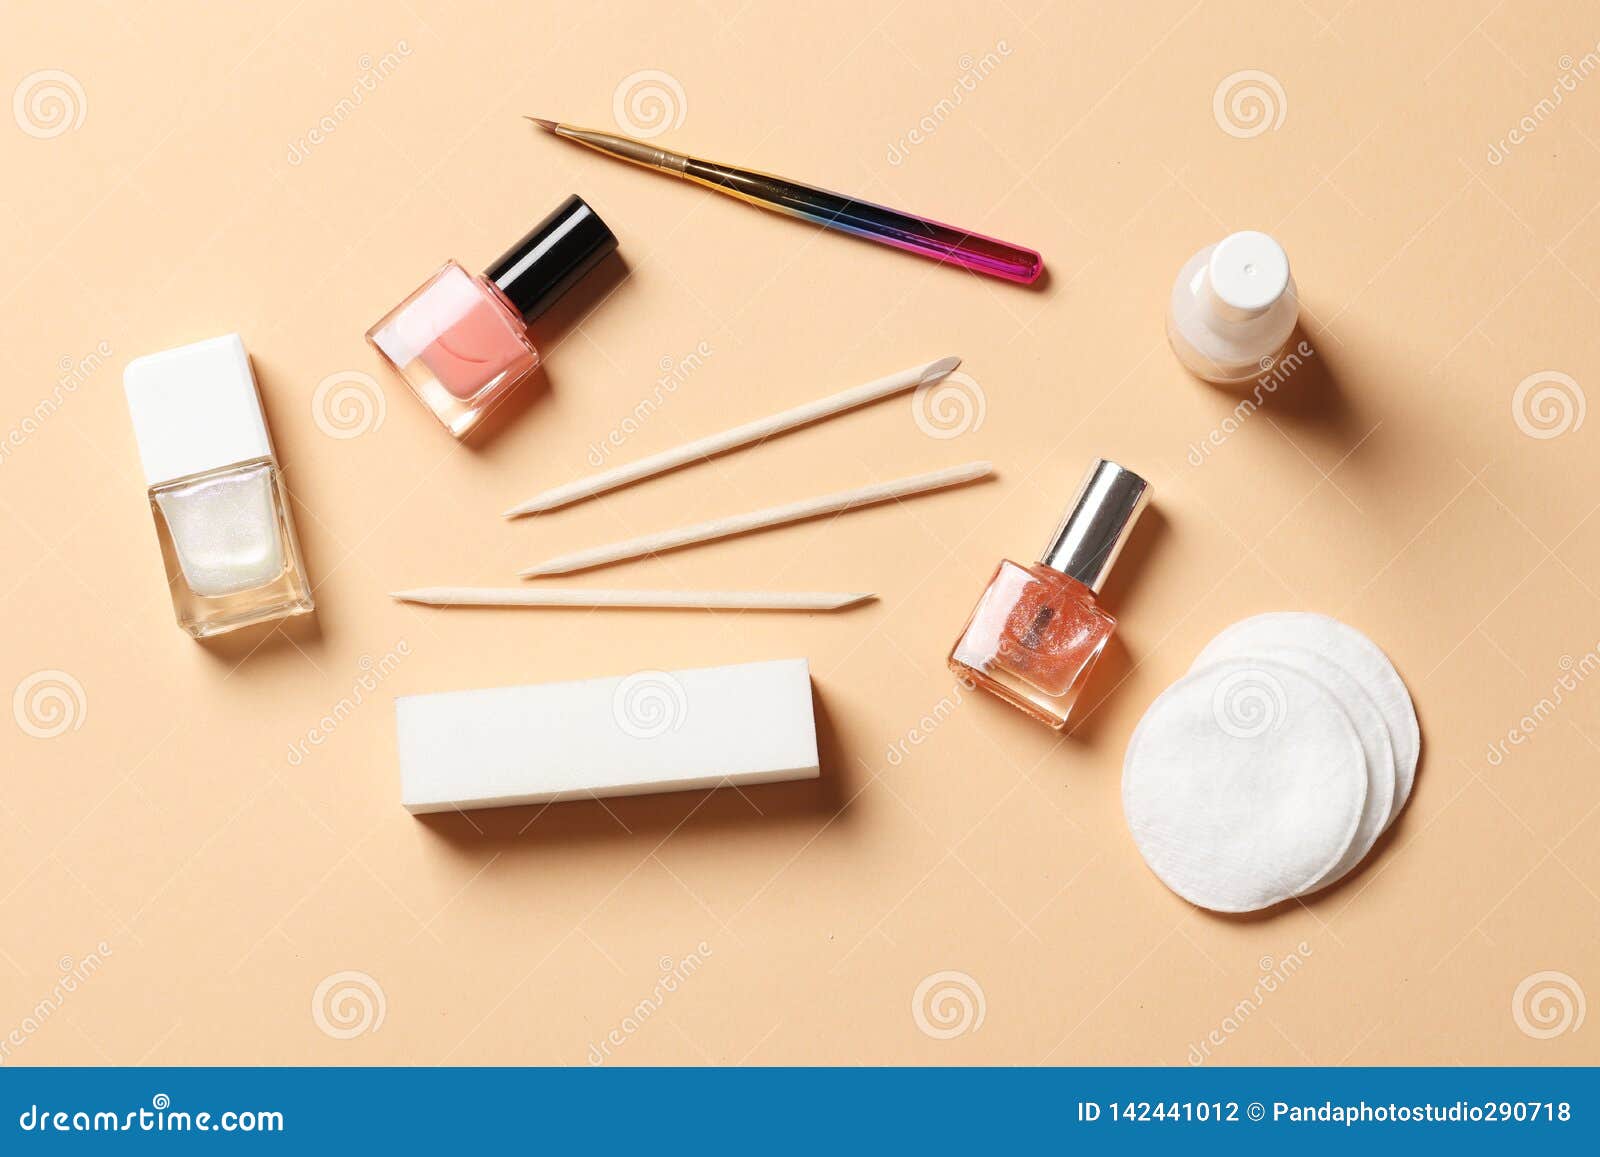 A Set of Tools for Manicure and Nail Polish Stock Photo - Image of ...